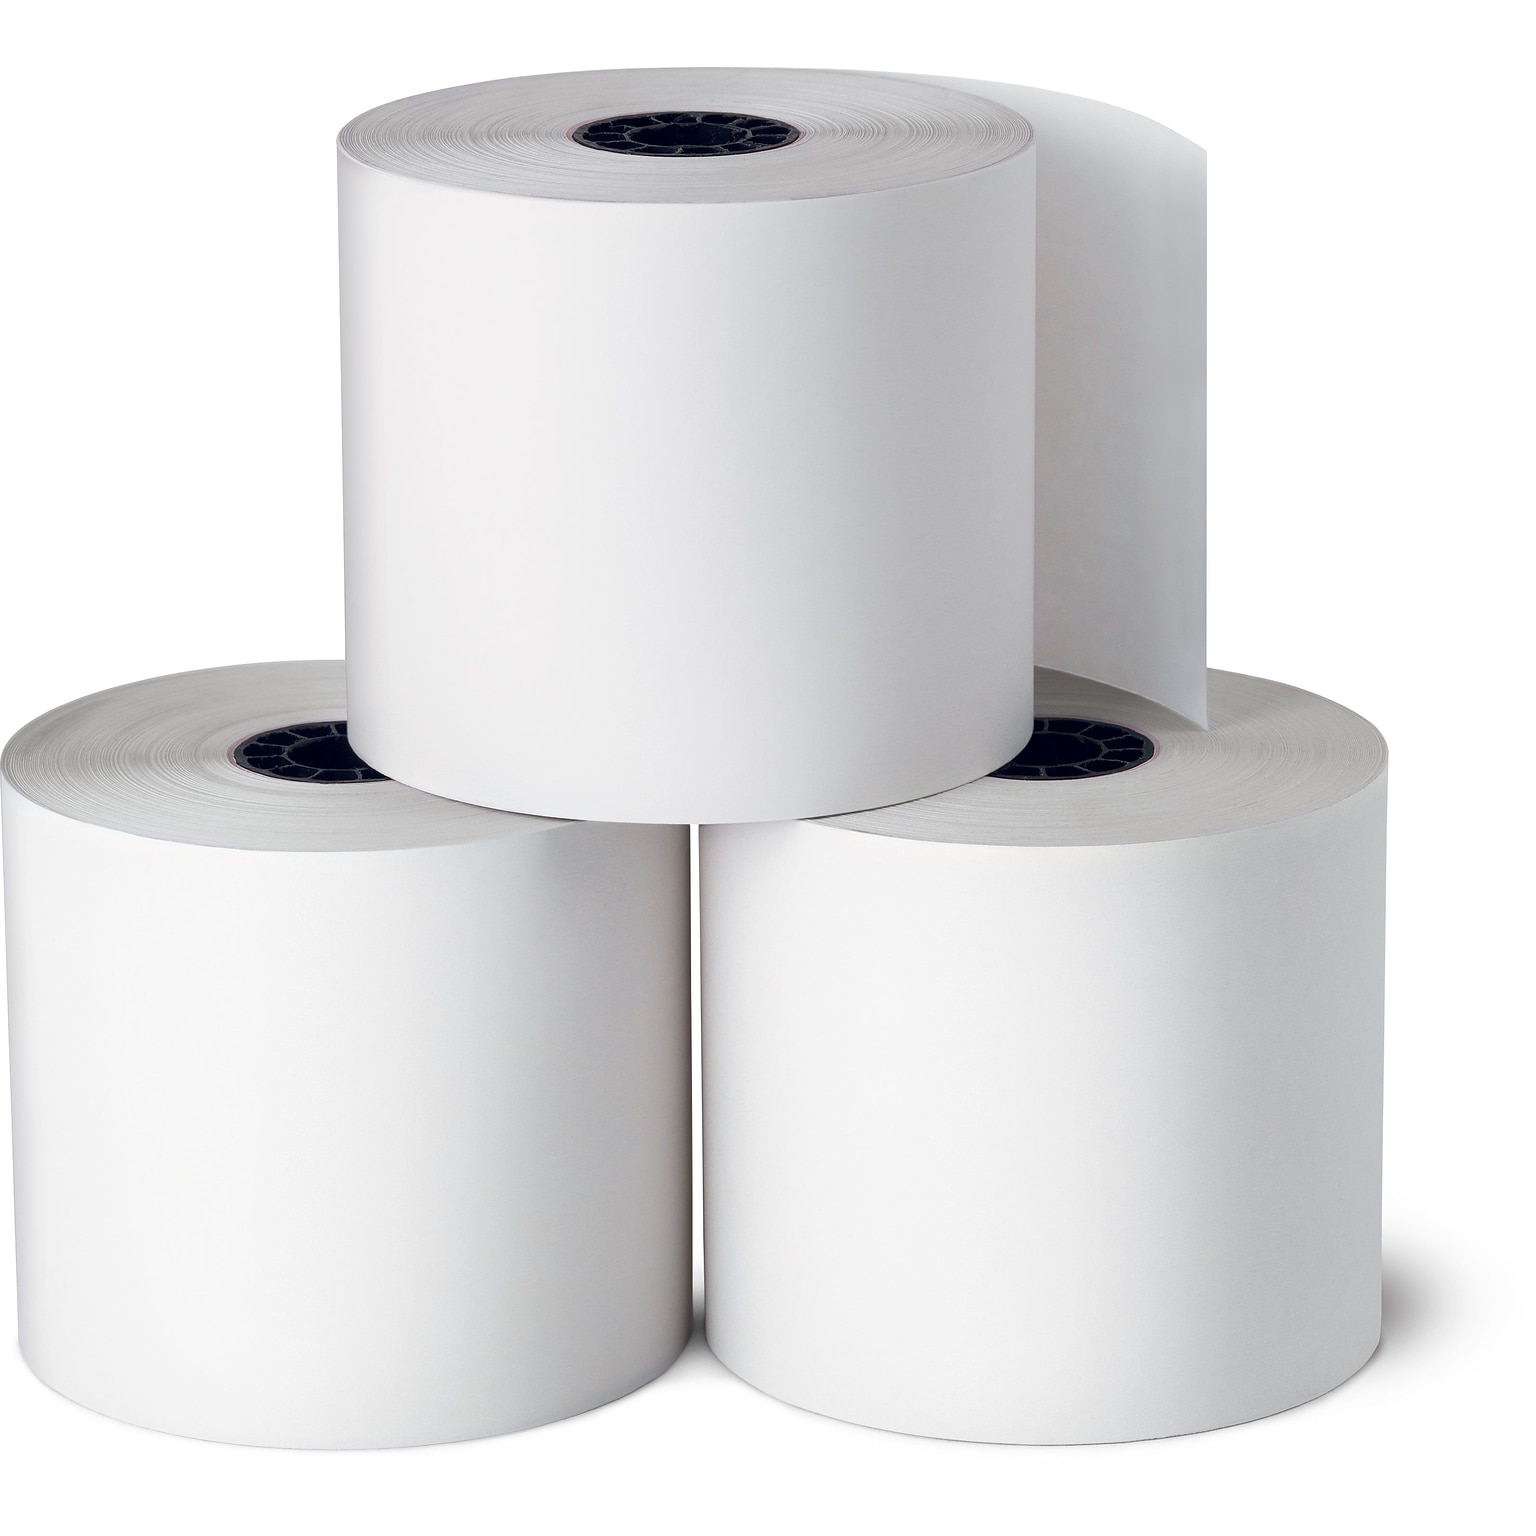 Staples® Thermal Cash Register/POS Rolls, 1-Ply, 2 5/16 x 200, 24/Pack (28392/492000)